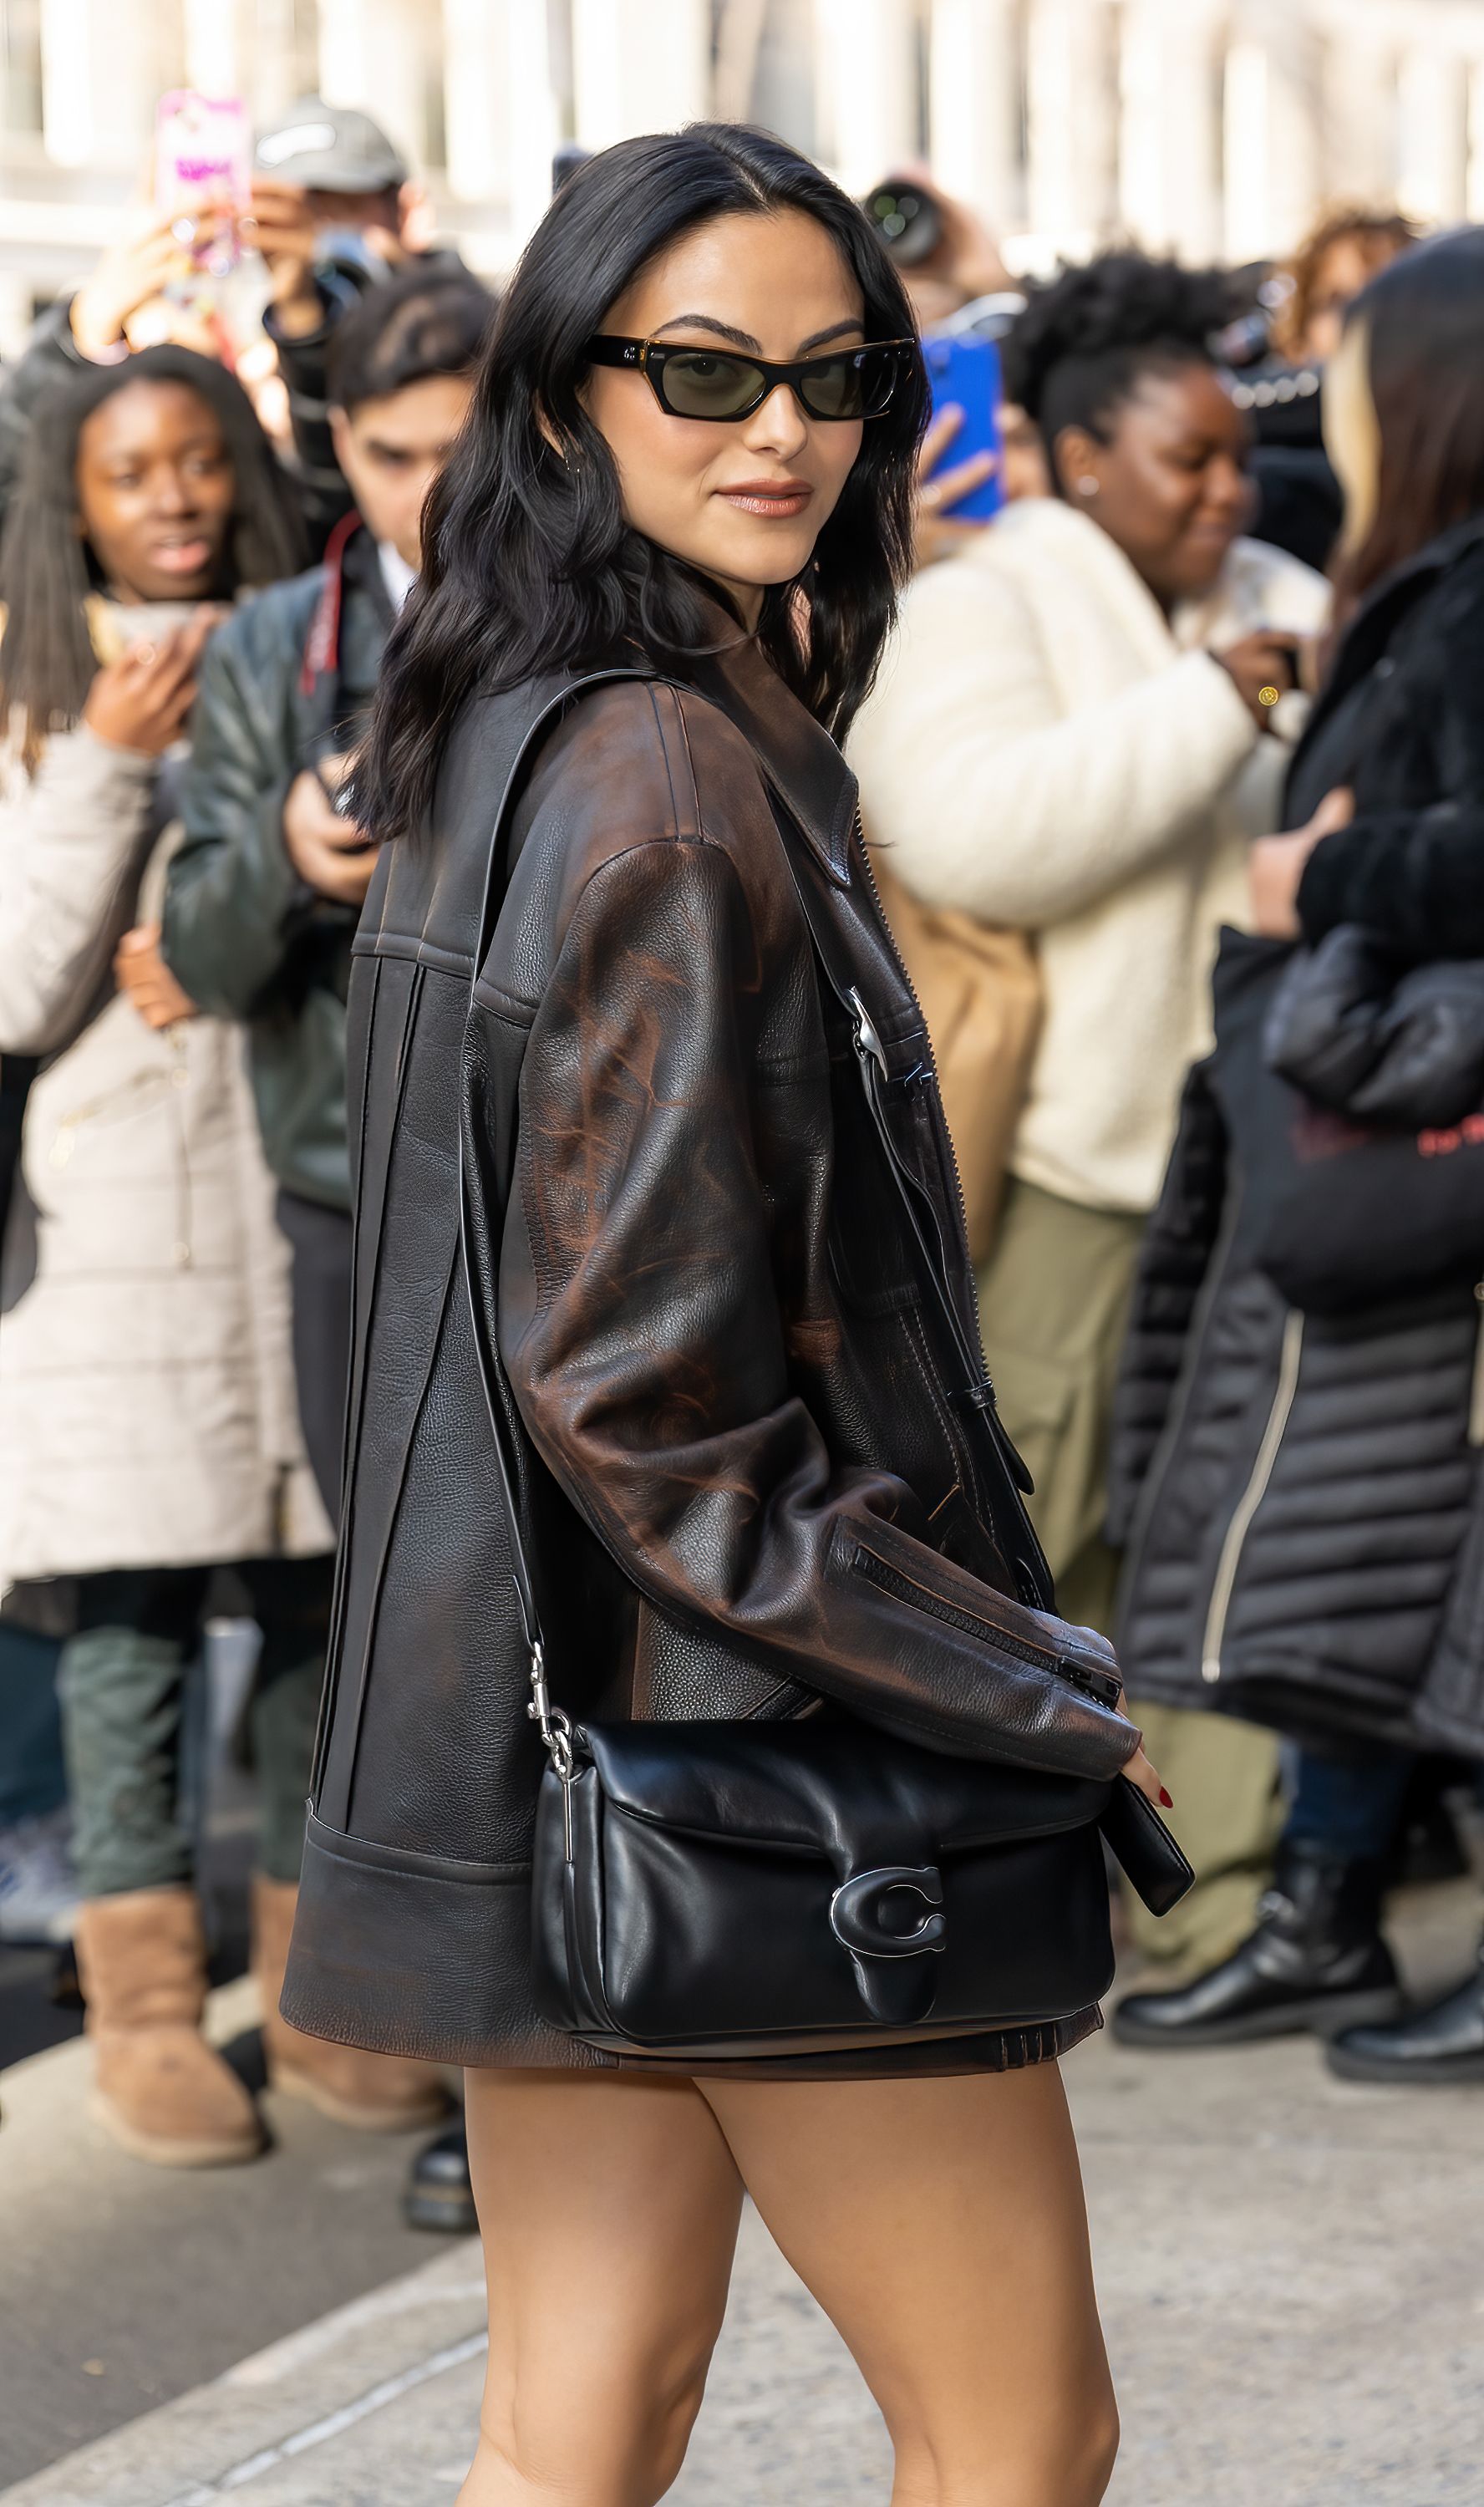 Camila Mendes Black Lingerie Outfit New York Fashion Week